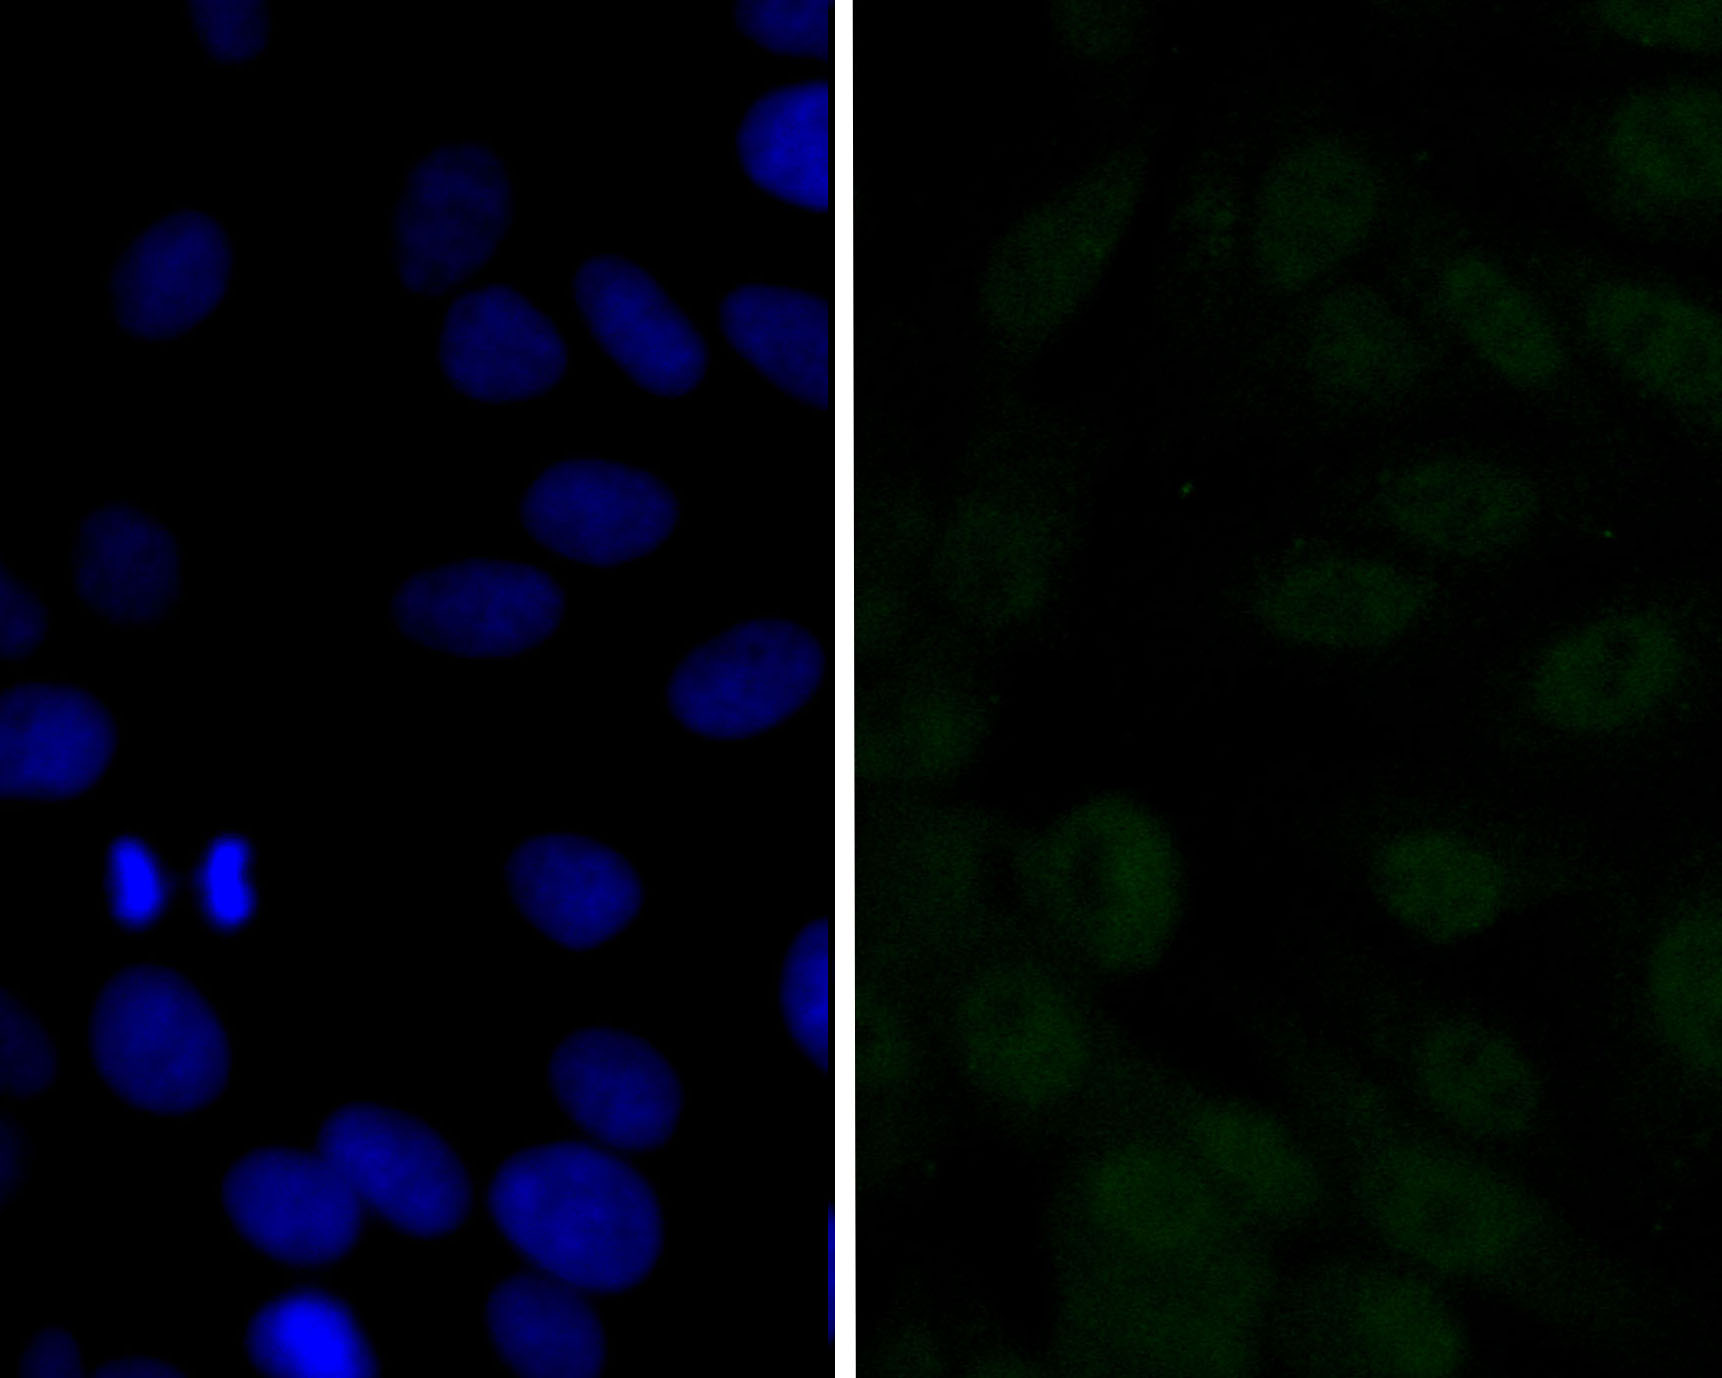 ICC staining of CDKN2A/p16INK4a in MCF-7 cells (green). Formalin fixed cells were permeabilized with 0.1% Triton X-100 in TBS for 10 minutes at room temperature and blocked with 1% Blocker BSA for 15 minutes at room temperature. Cells were probed with the primary antibody (ER2001-30, 1/100) for 1 hour at room temperature, washed with PBS. Alexa Fluor®488 Goat anti-Rabbit IgG was used as the secondary antibody at 1/100 dilution. The nuclear counter stain is DAPI (blue).